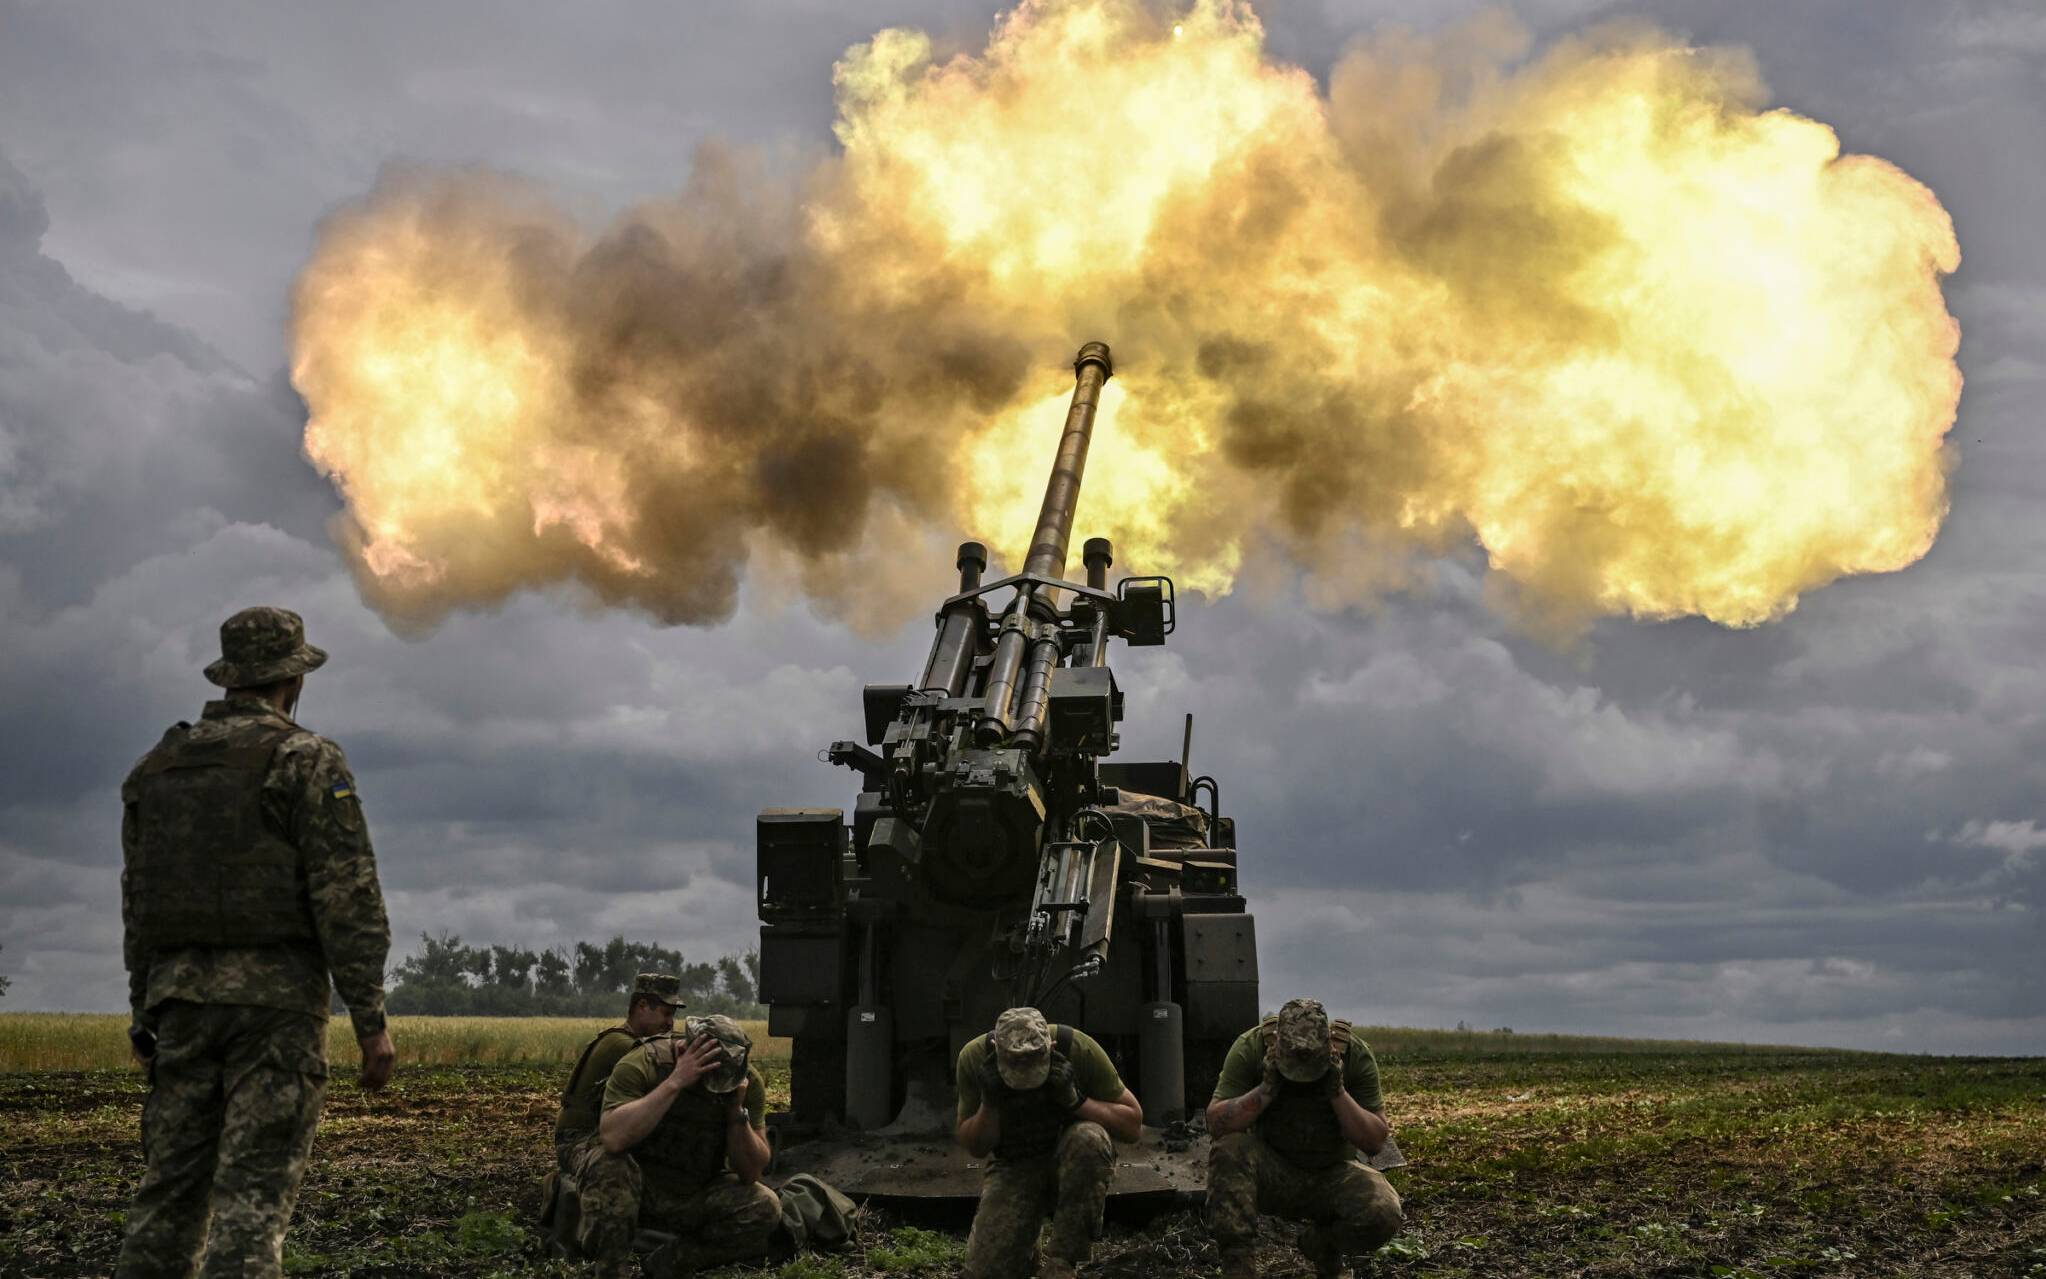 Ukrainian servicemen fire with a French self-propelled 155 mm/52-calibre gun Caesar towards Russian positions at a front line in the eastern Ukrainian region of Donbas on June 15, 2022. - Ukraine pleaded with Western governments on June 15, 2022 to decide quickly on sending heavy weapons to shore up its faltering defences, as Russia said it would evacuate civilians from a frontline chemical plant. (Photo by ARIS MESSINIS / AFP)